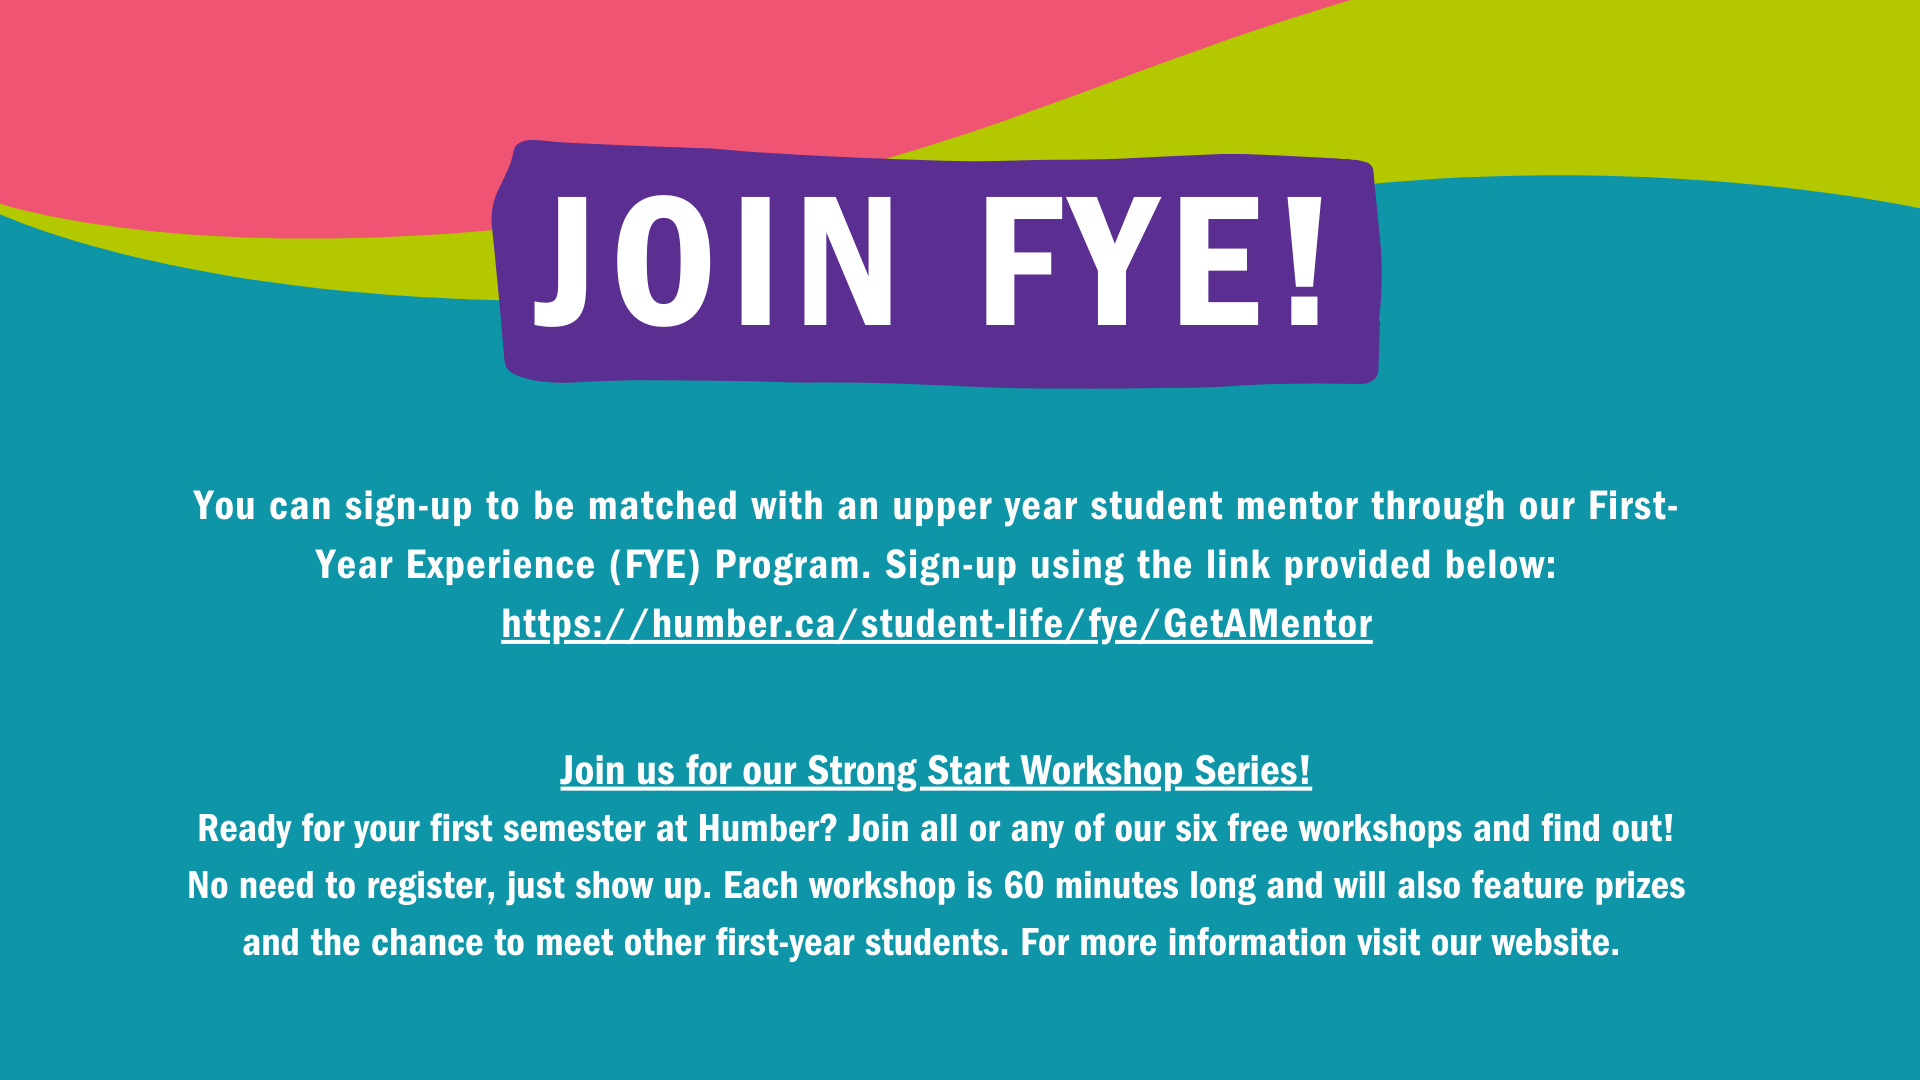 Join FYE! You can sign-up to be matched with an upper year student mentor through our First-Year Experience (FYE) Program. Sign-up for a Peer Mentor. Ready for your first semester at 英雄联盟竞猜线上入口靠谱? Join us for any of our six free workshops and find out! No need to register, just show up. Each workshop is 60 minutes long and will also feature prizes and the chance to meet other first-year students. For more information visit our website.